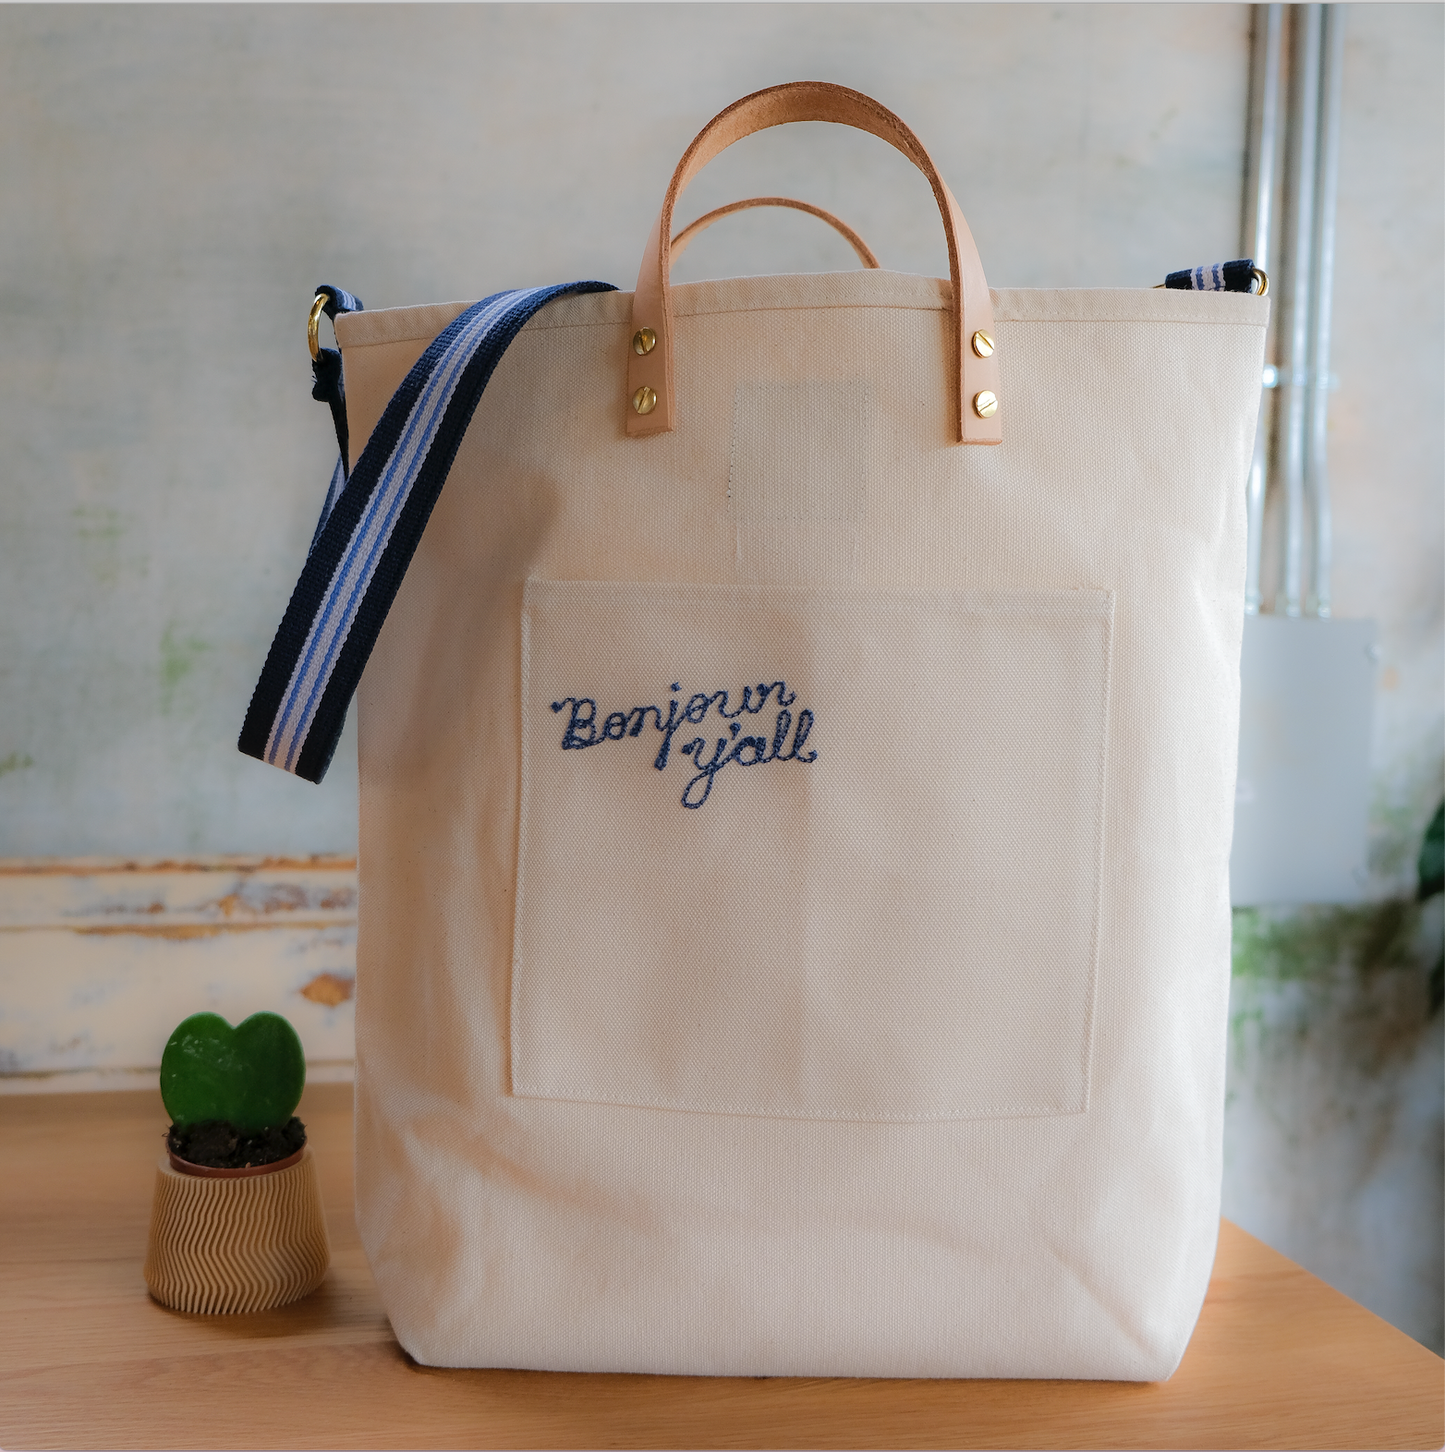 BL x Lunchroom Anxiety | Large Bucket Canvas Tote, Croissant Man